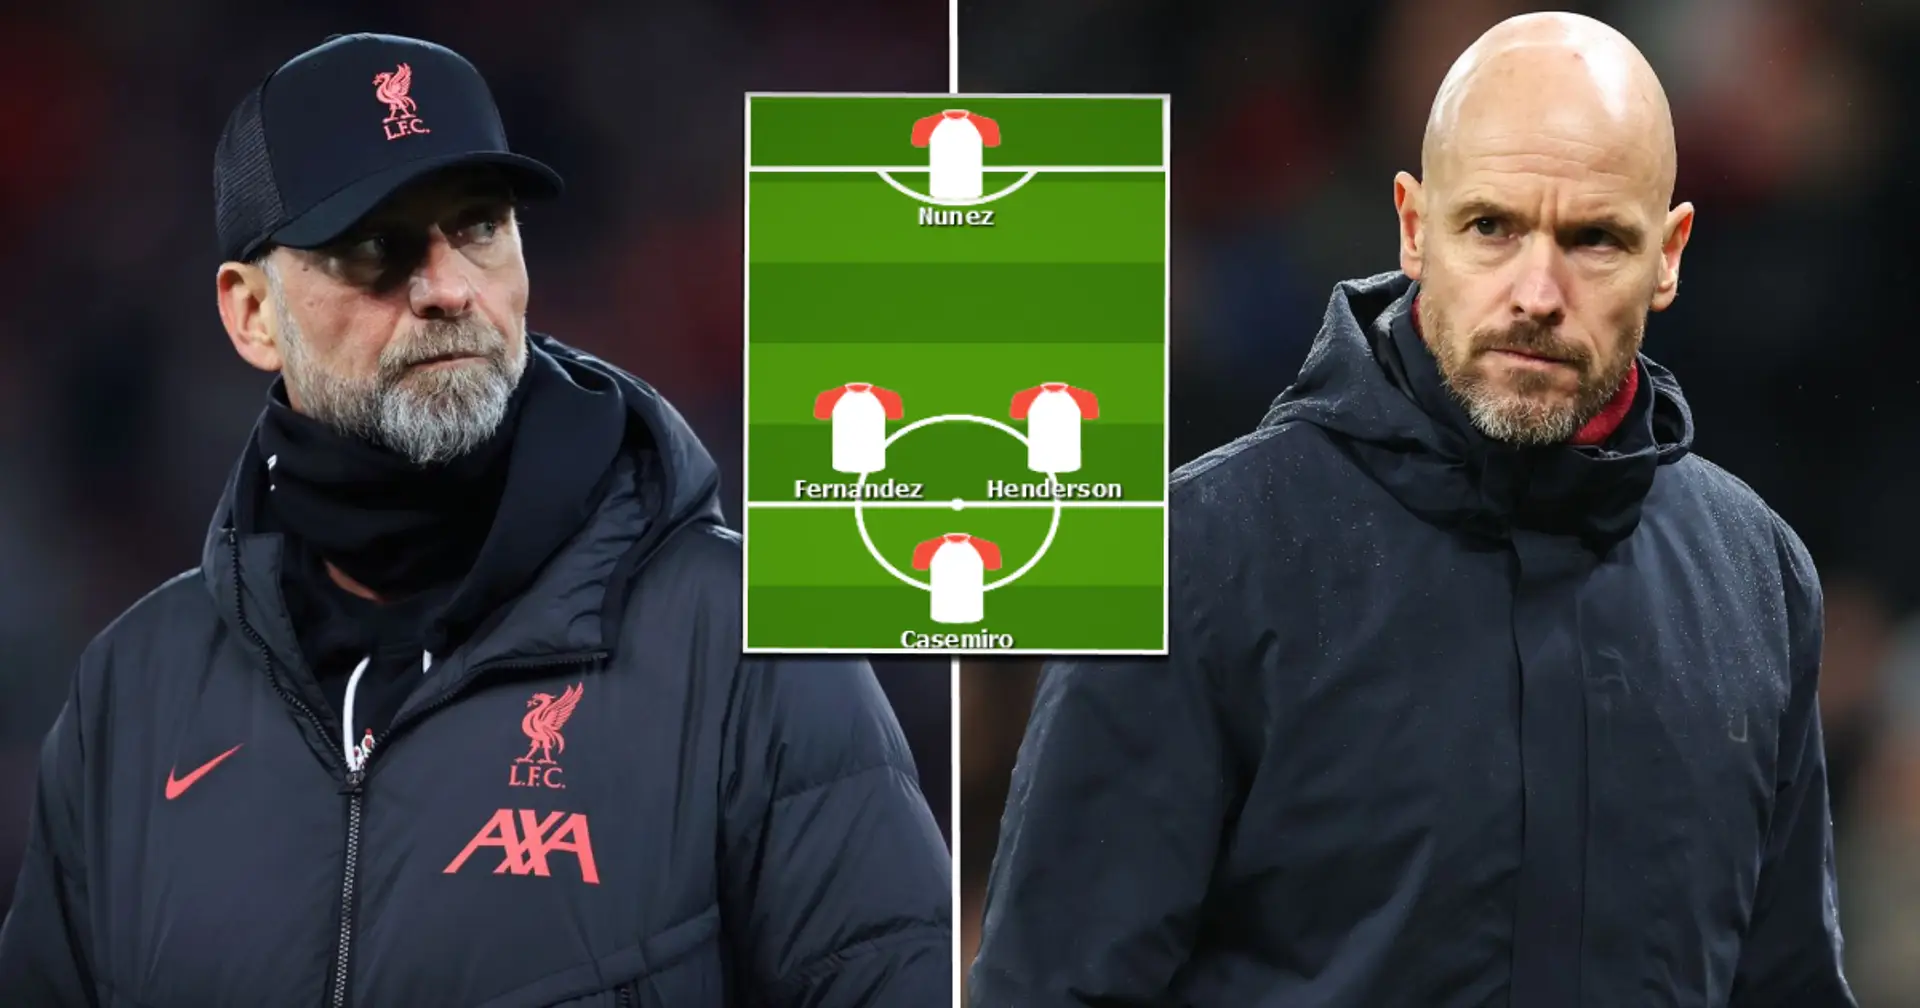 Liverpool vs Man United combined XI — based on current form 